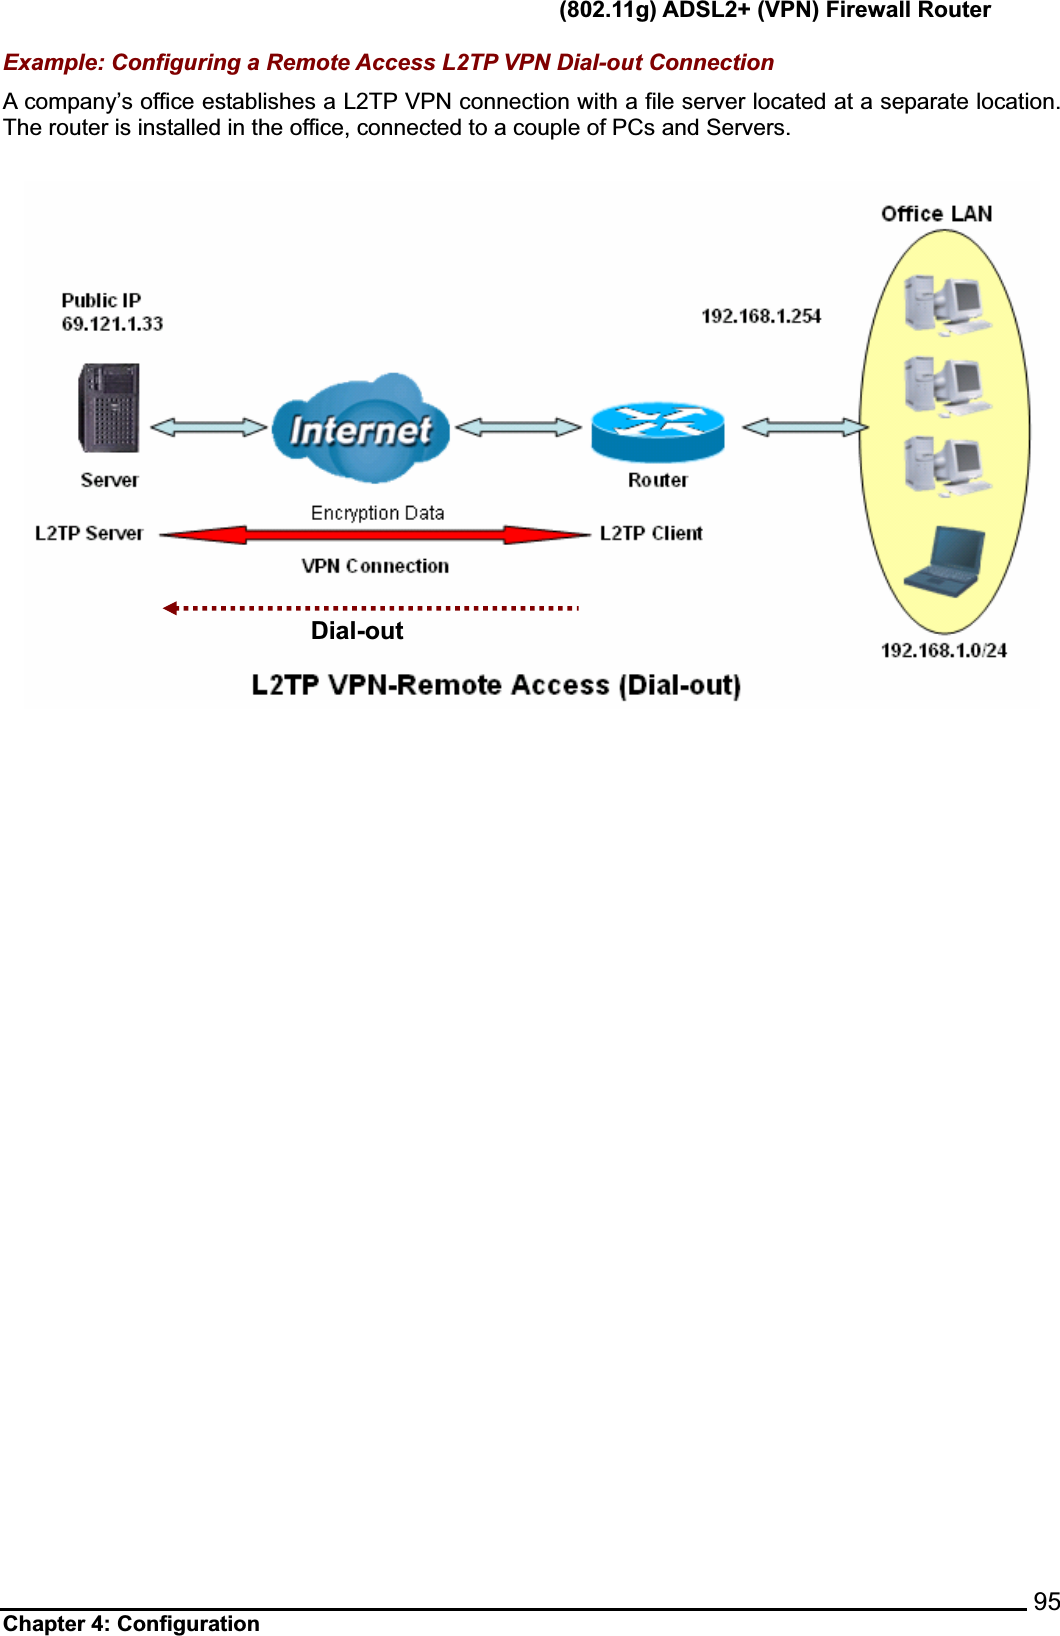      (802.11g) ADSL2+ (VPN) Firewall Router Chapter 4: Configuration    95Example: Configuring a Remote Access L2TP VPN Dial-out Connection A company’s office establishes a L2TP VPN connection with a file server located at a separate location. The router is installed in the office, connected to a couple of PCs and Servers.Dial-out